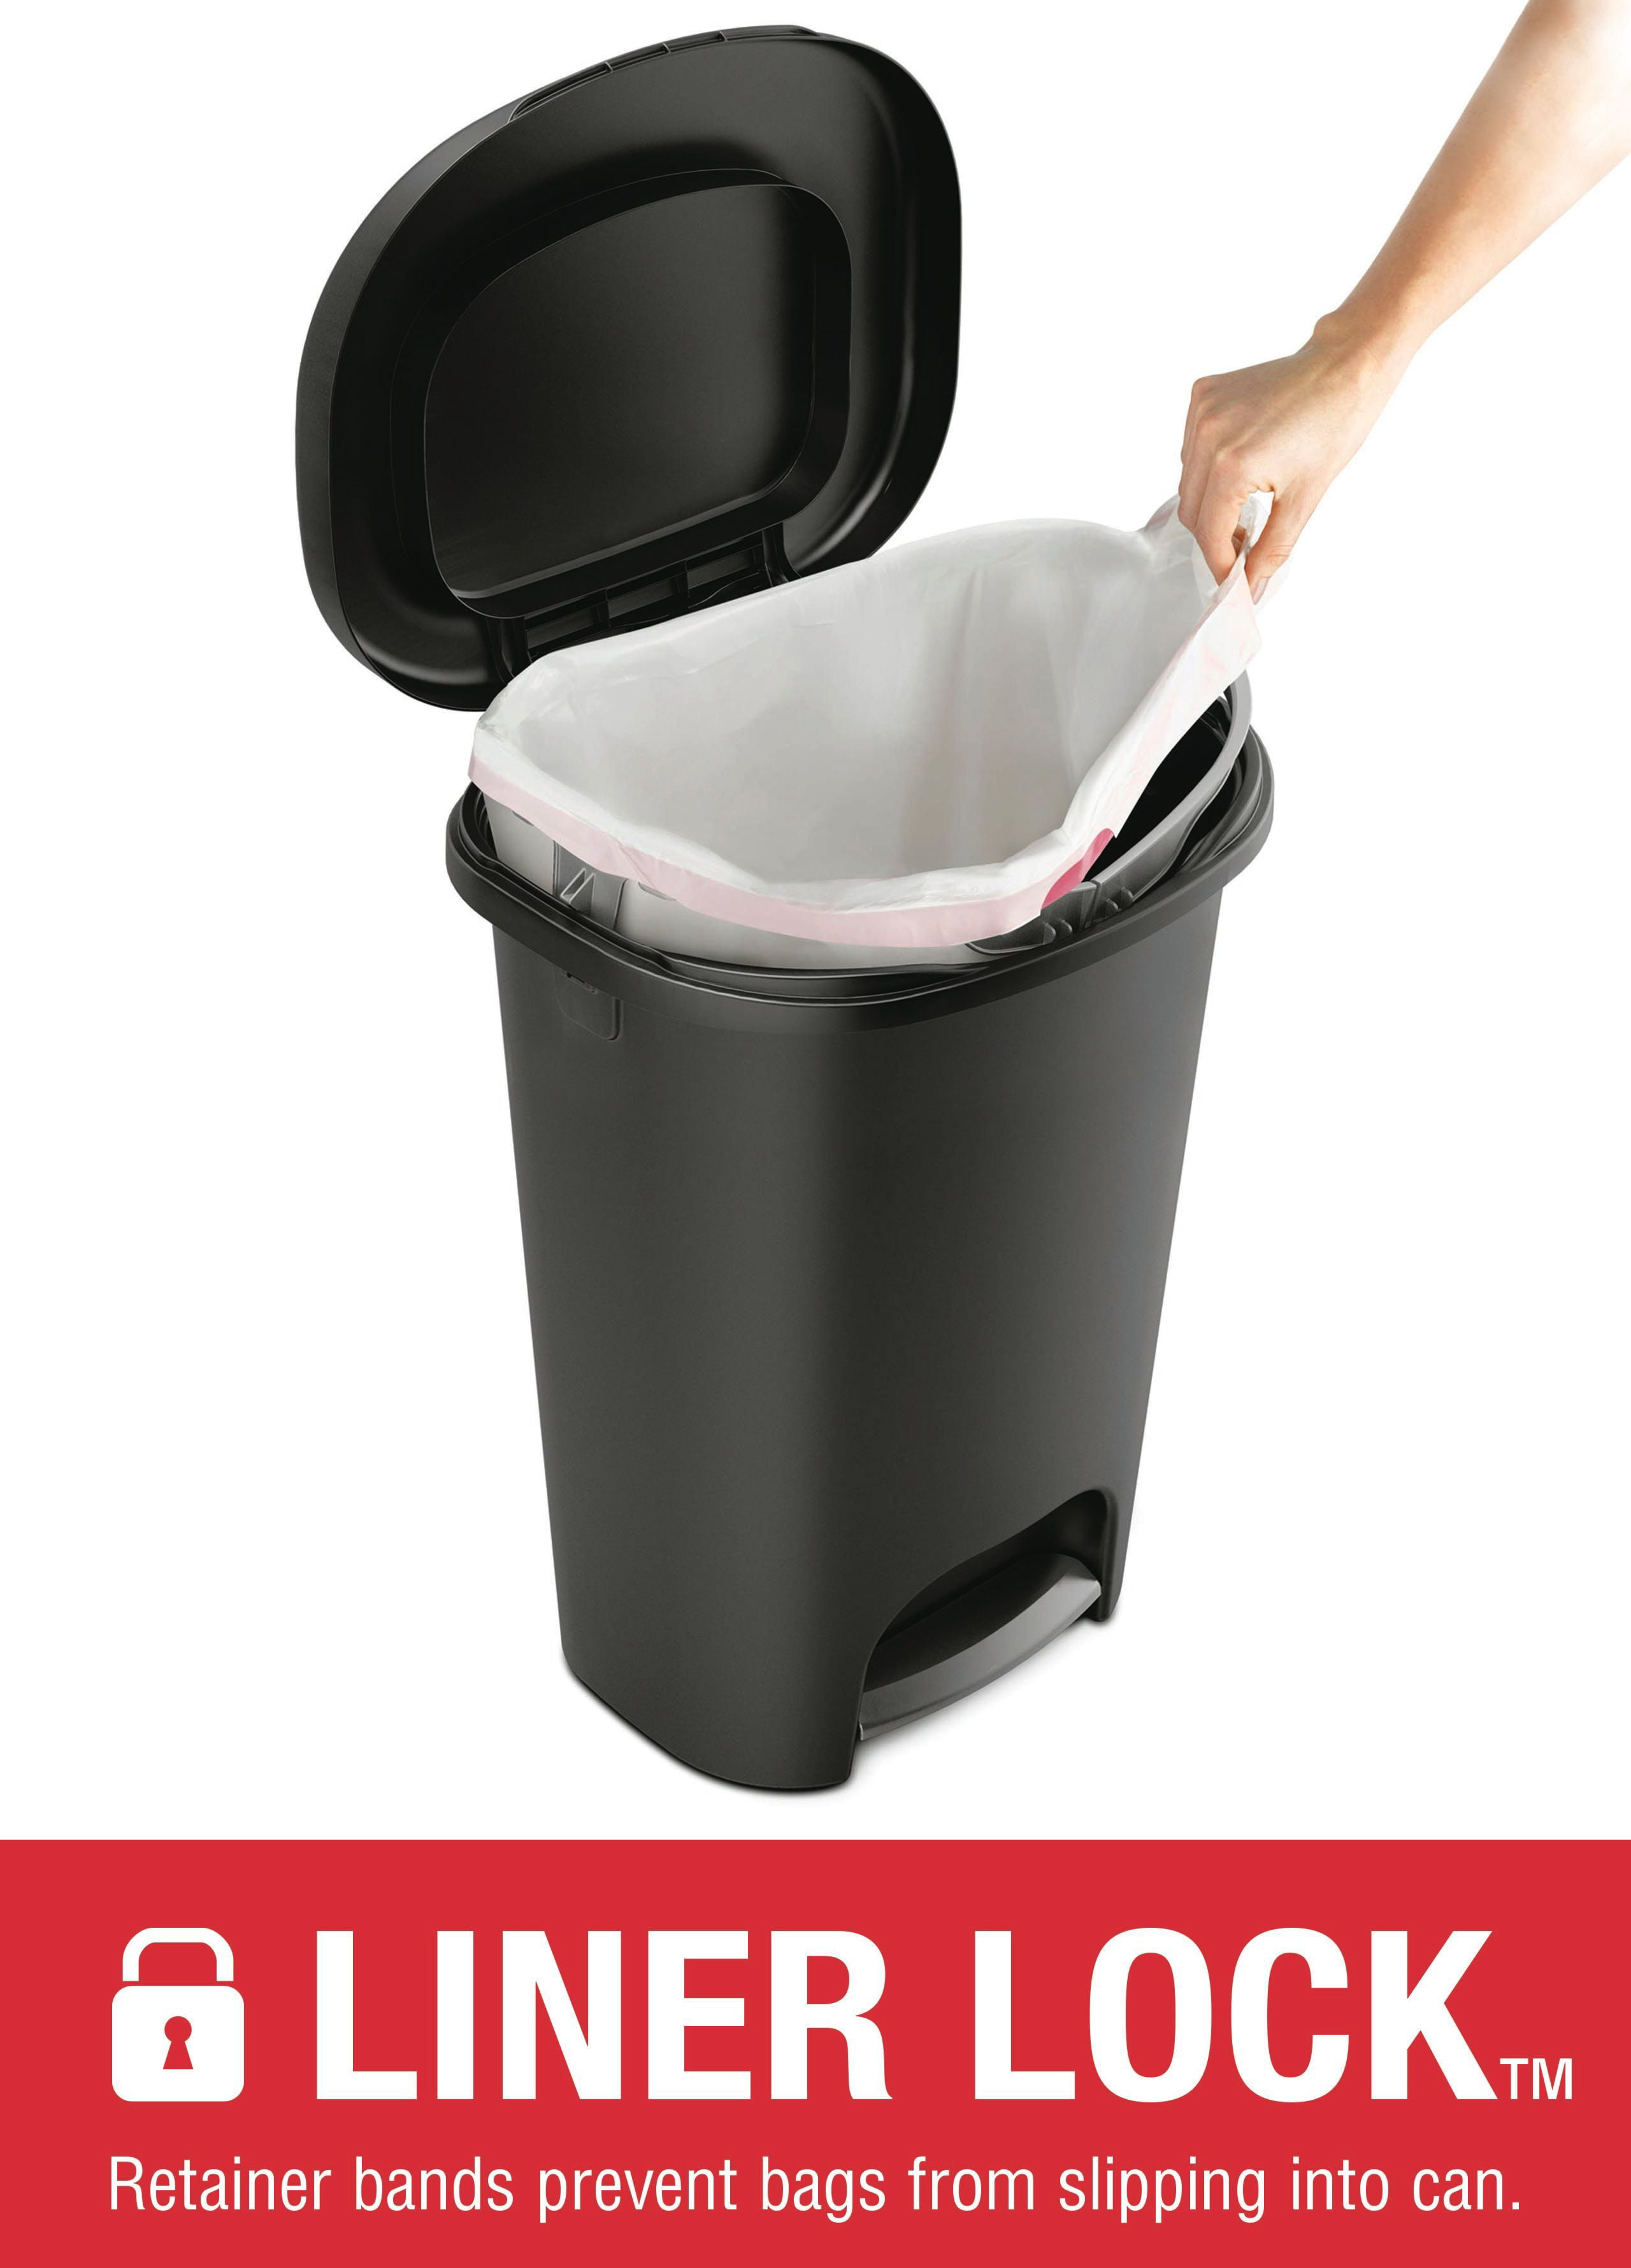 Hands Free Trash Cans: Get The Most From Rubbermaid